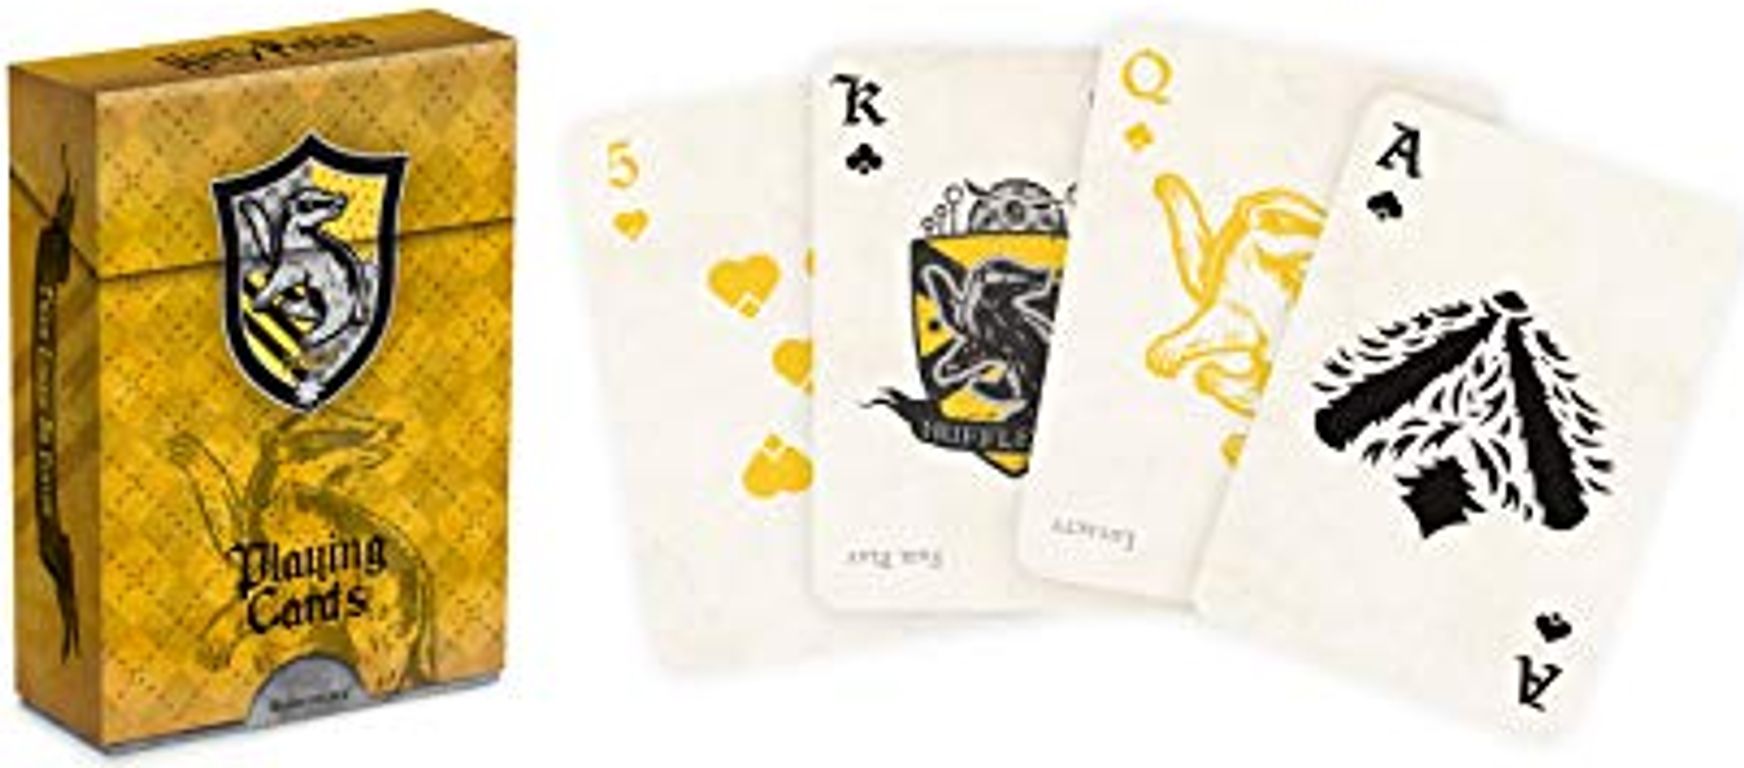 Harry Potter Hufflepuff House Playing Cards cards